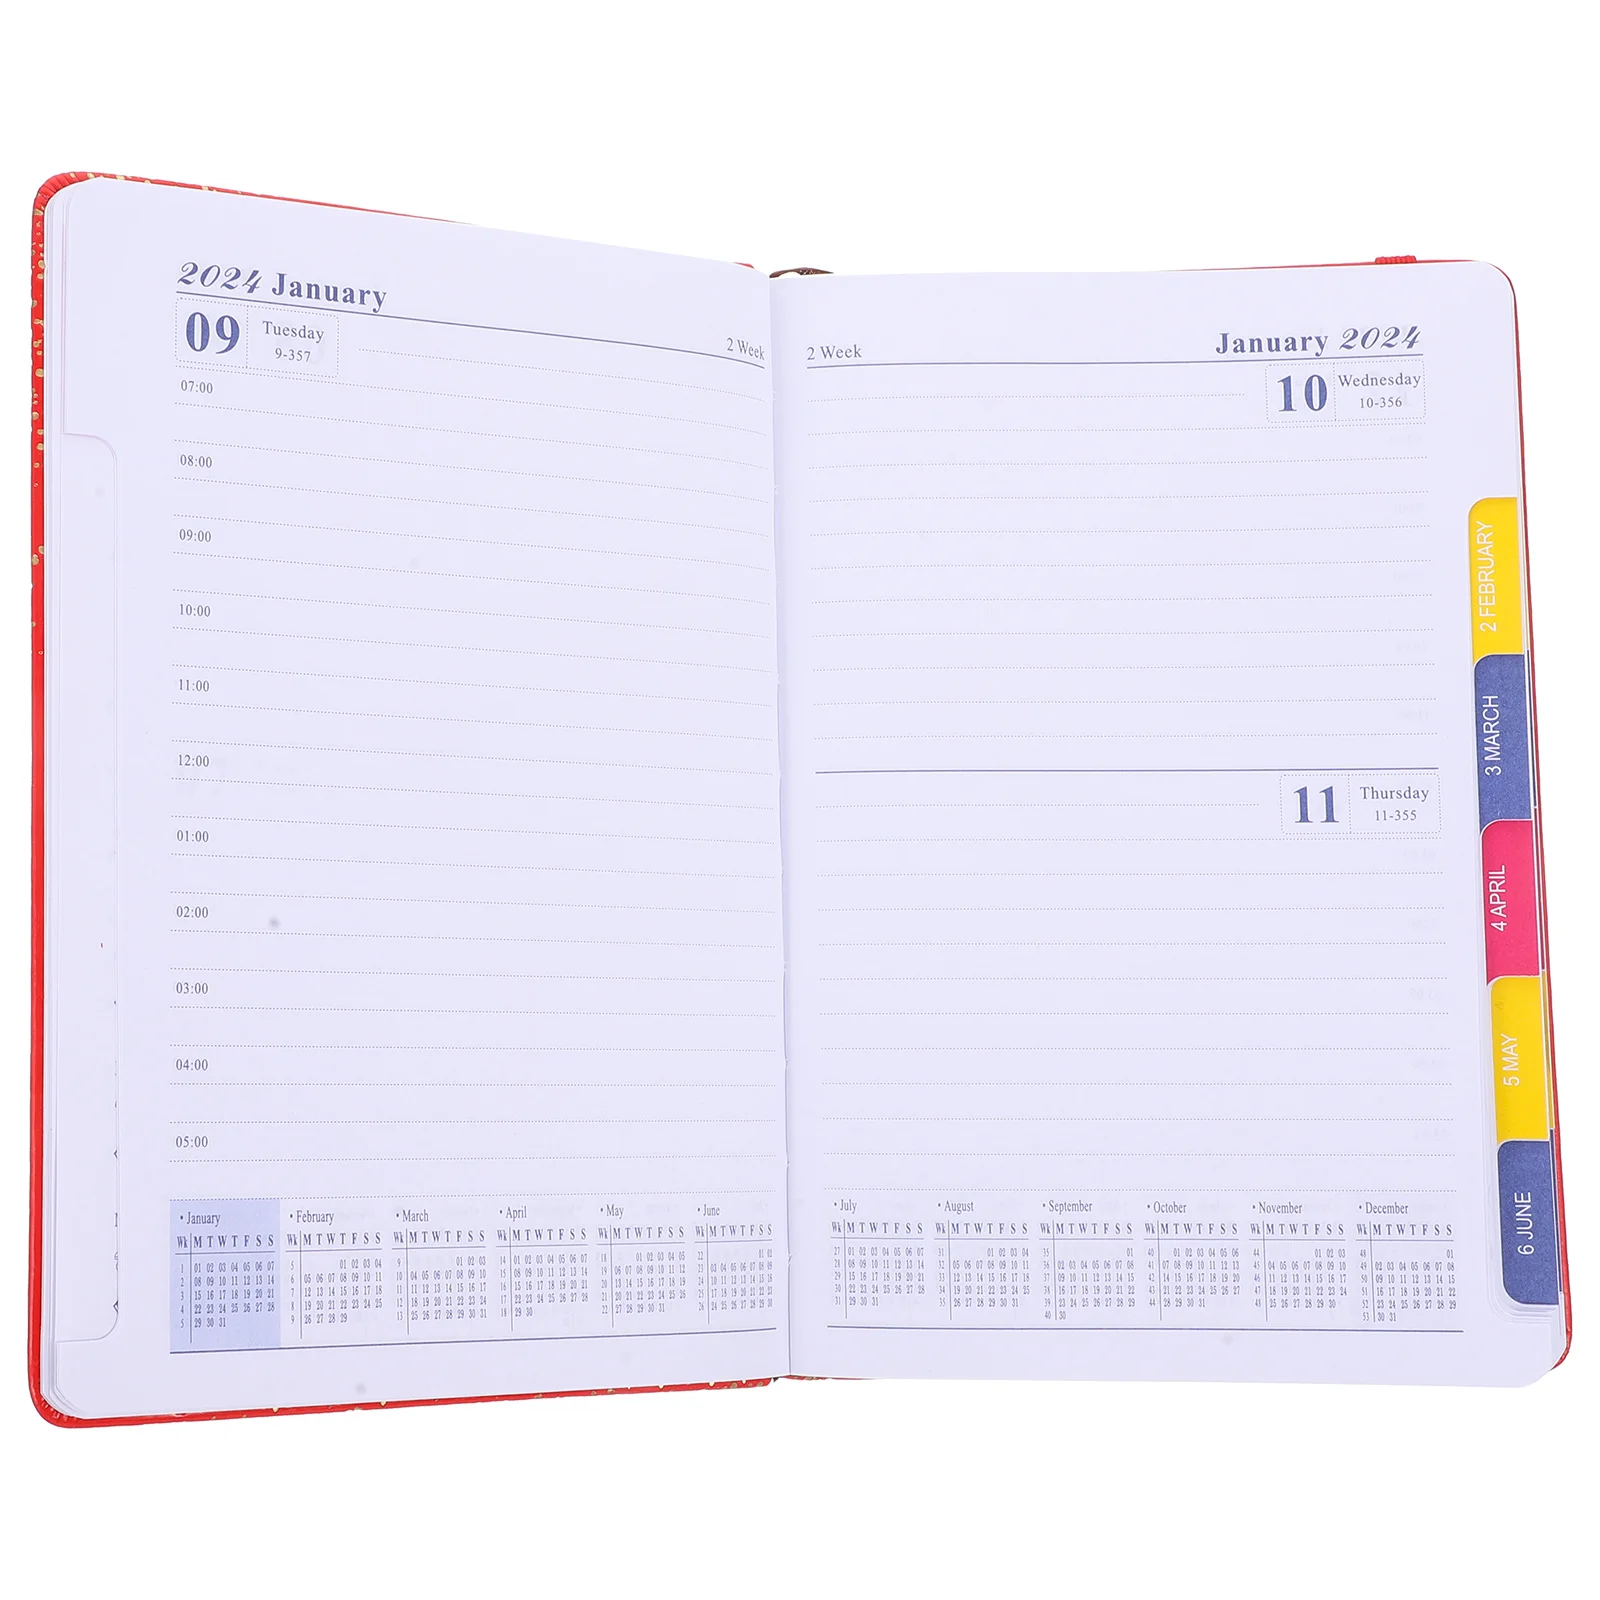 The Notebook Date Notepad Weekly Plan Pad Efficient Planner Schedule Notepad For Students School Office